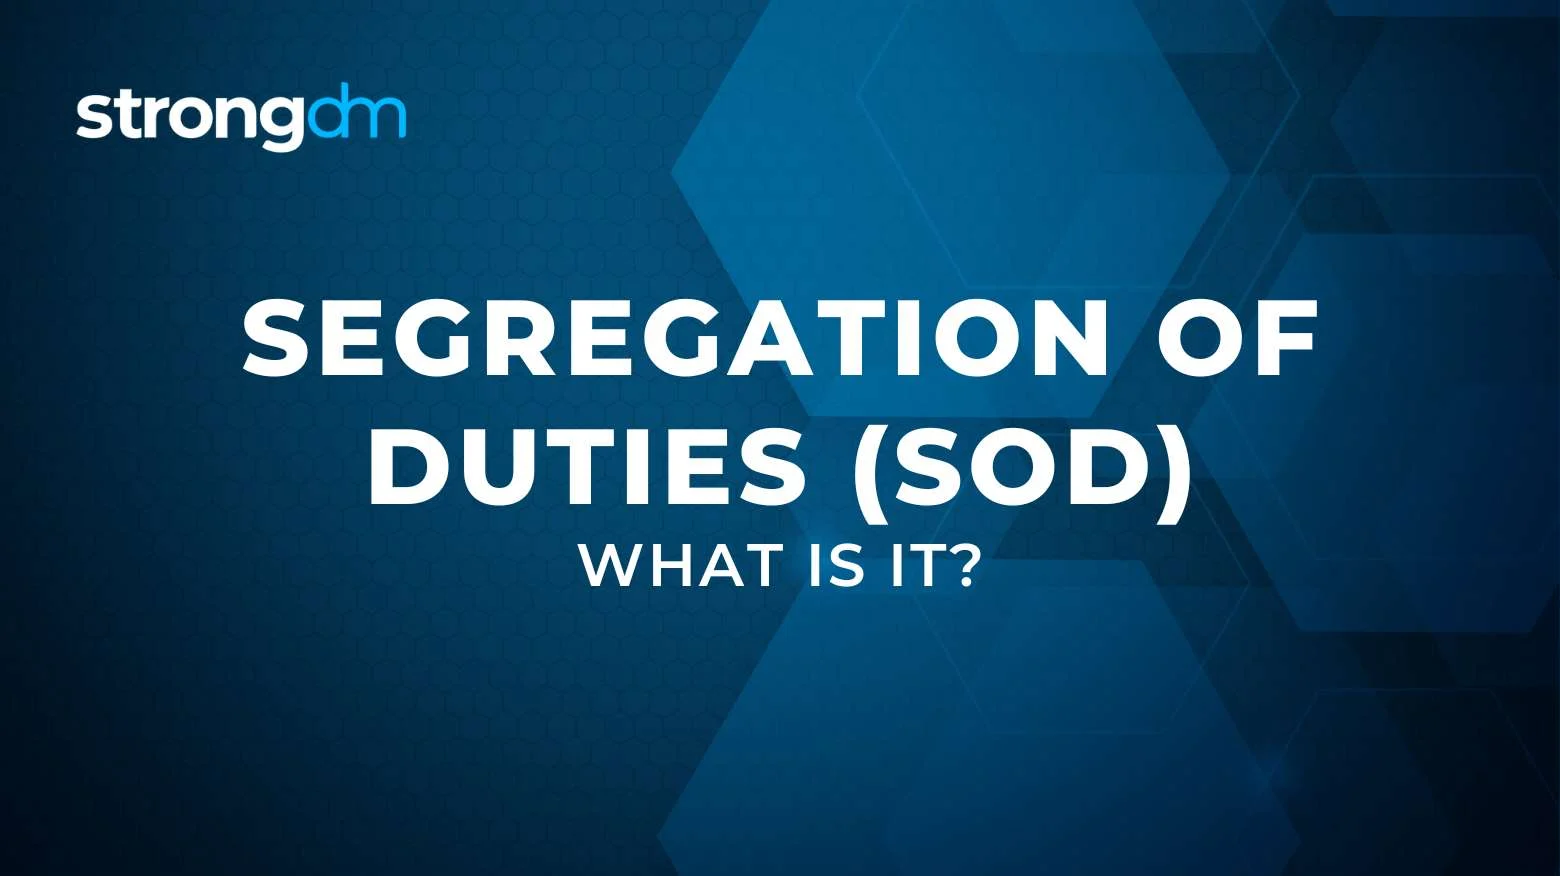 What Is Segregation of Duties (SoD)?